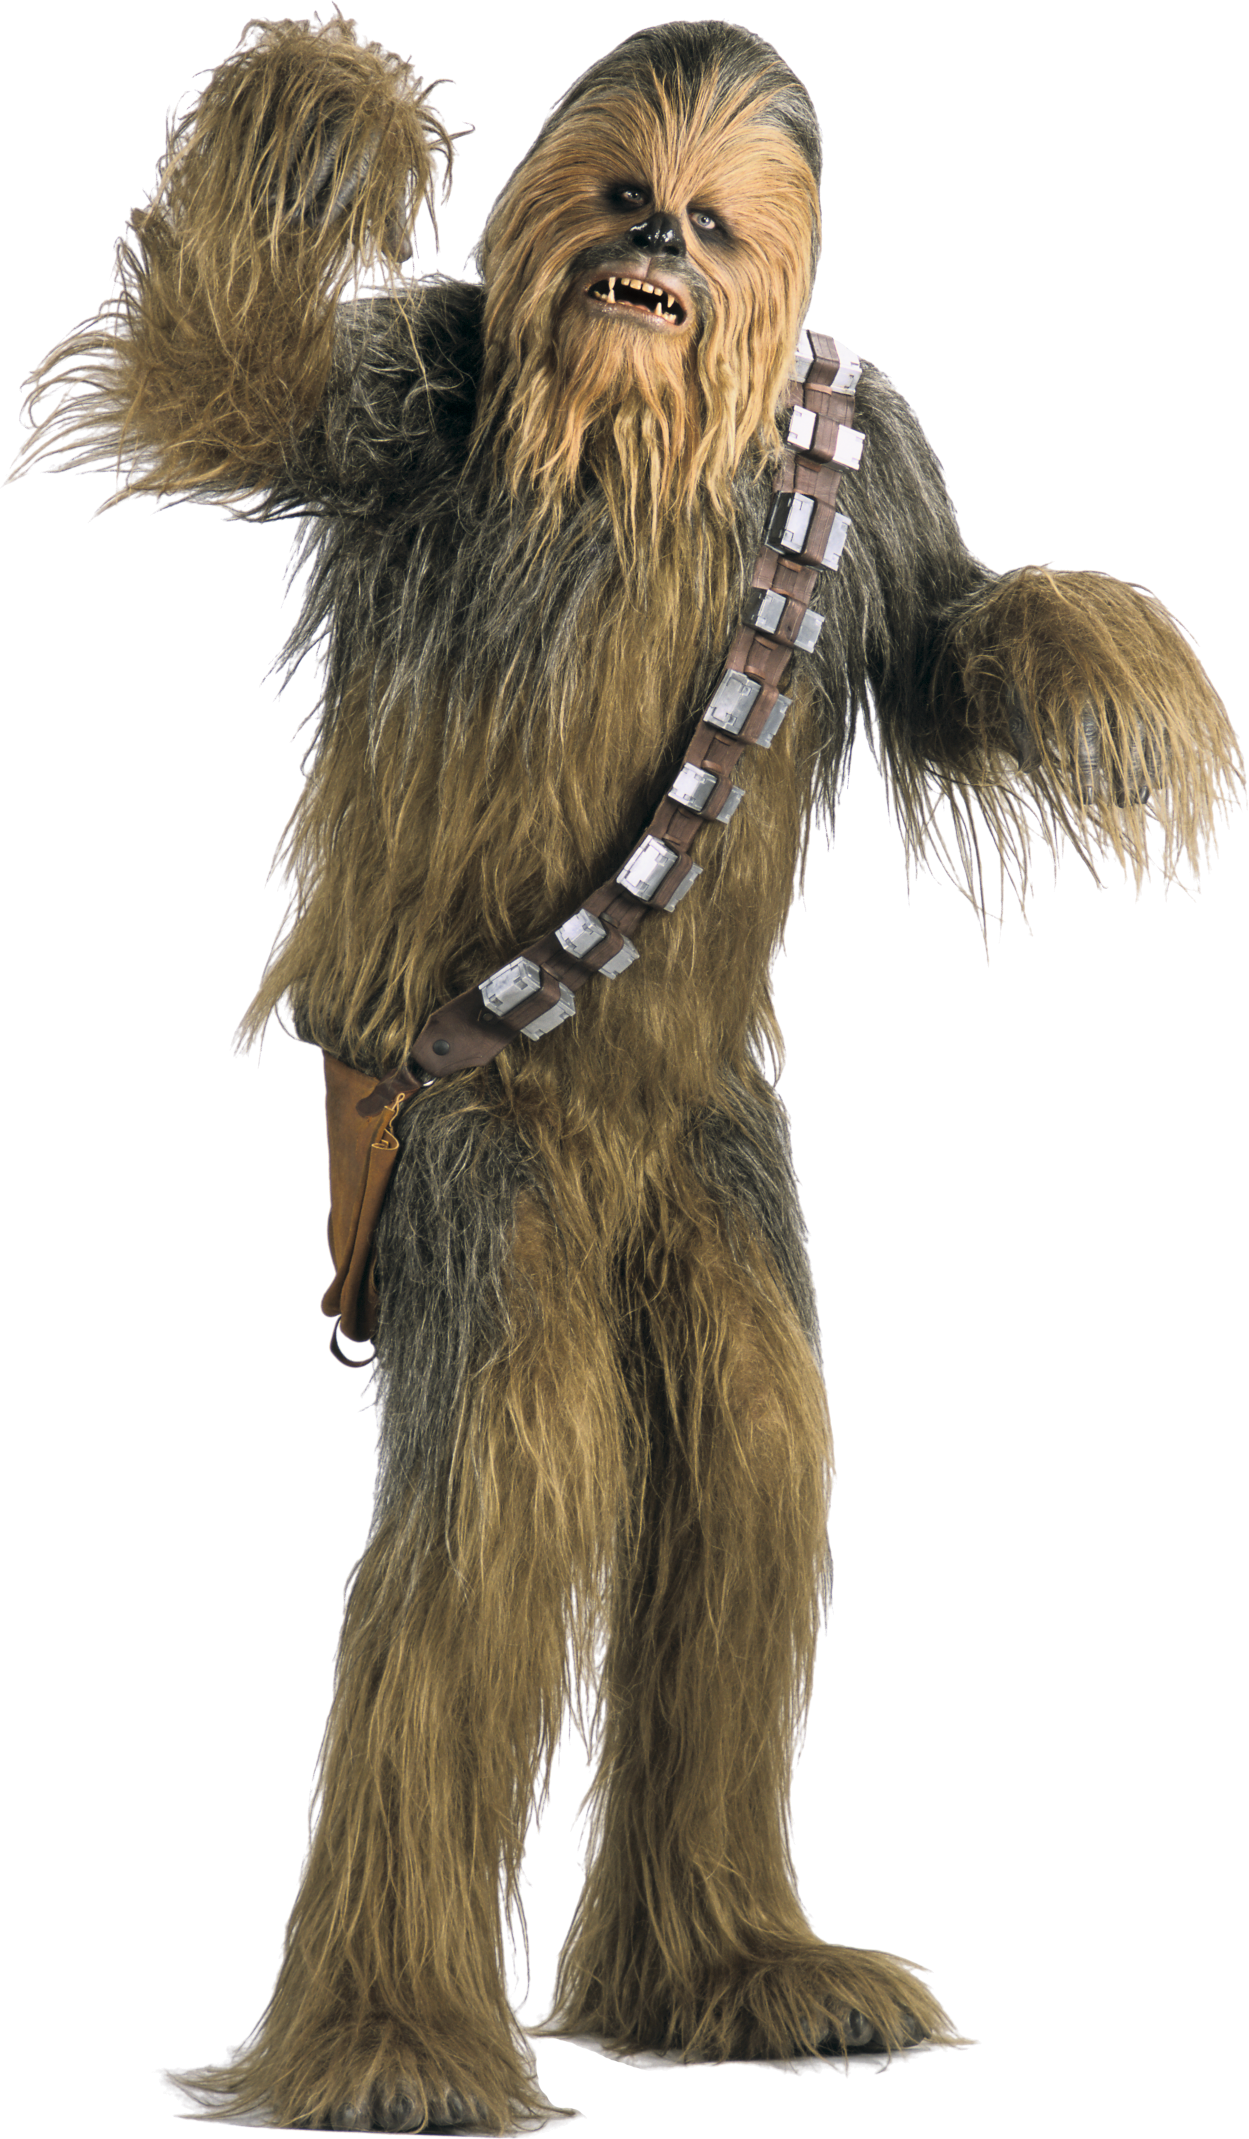 Chewbacca PNG Transparent Image PNG Clip arts.